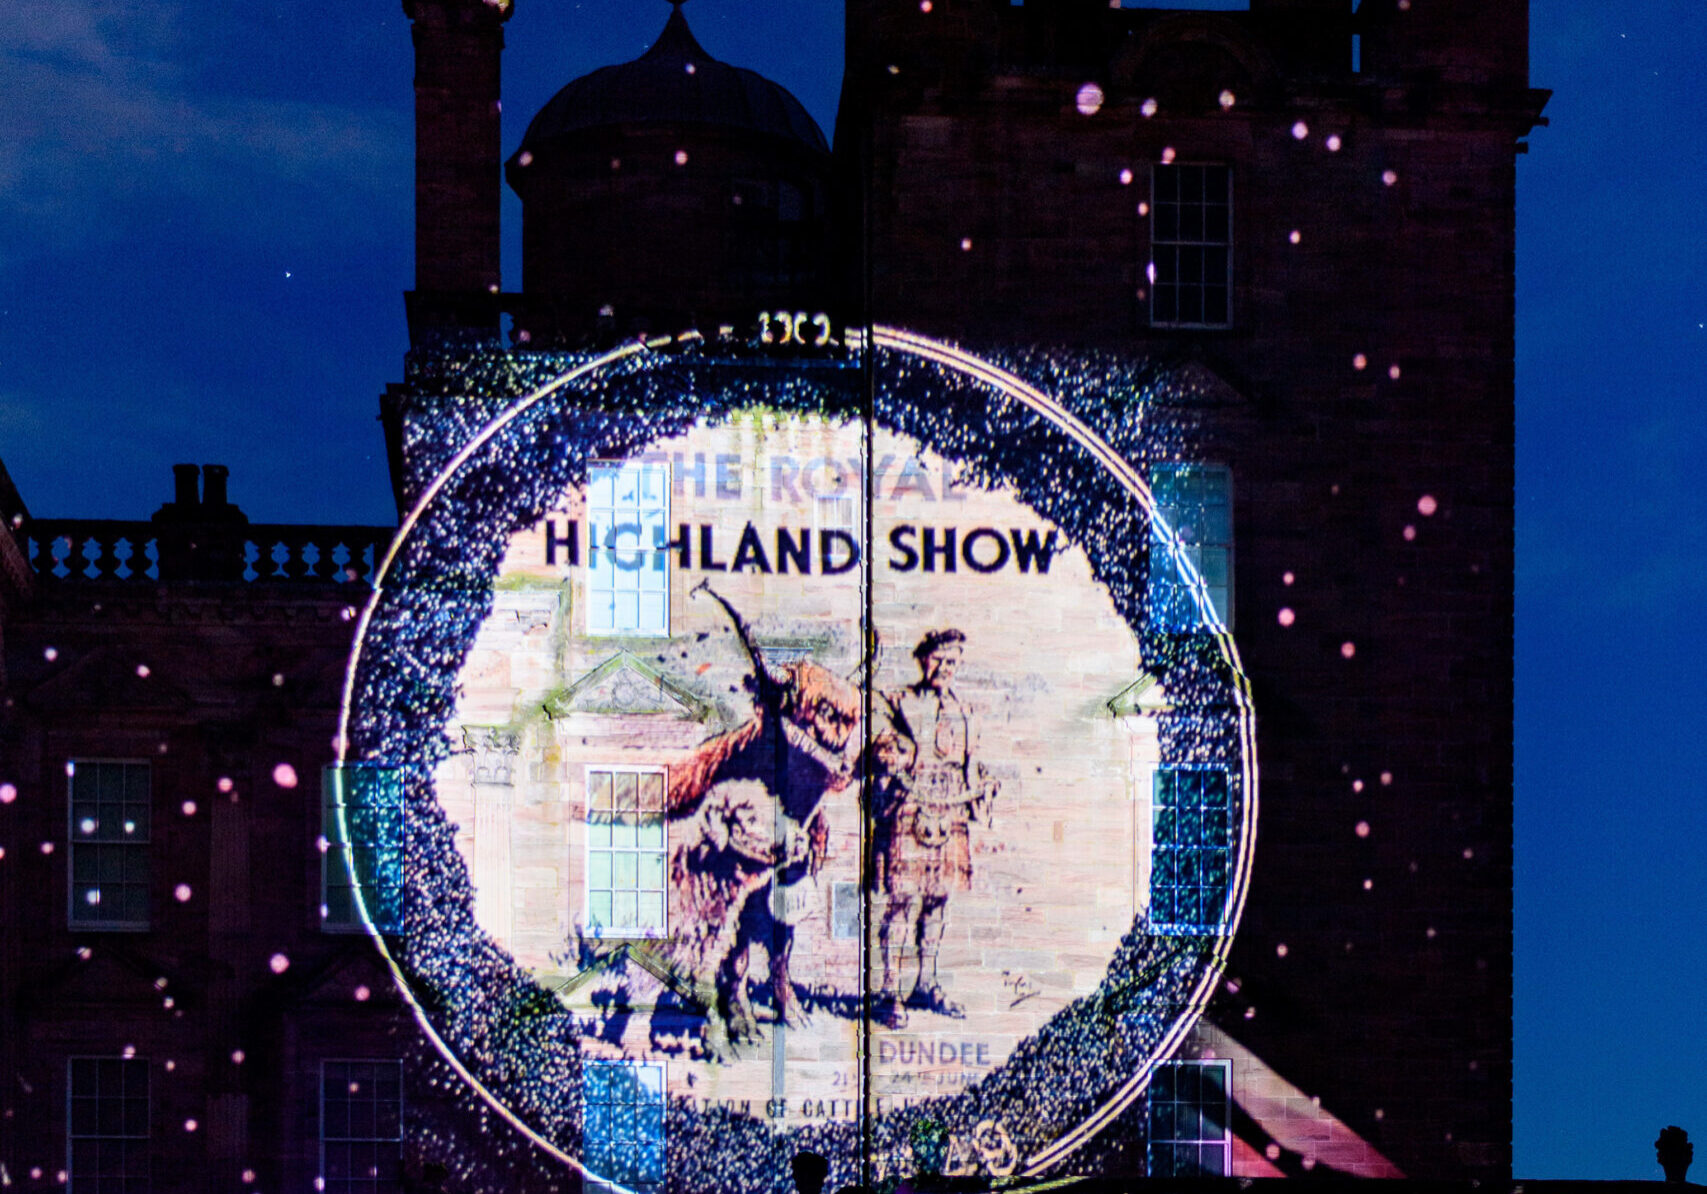 **Pics free to use**

RHS Illuminated, Drumlanrig Castle.

Royal Highland Show celebrates 200 years with immersive projections across Scotland  

The Royal Highland Show is marking its 200th anniversary with a series of immersive storytelling installations across Scotland, animating and projecting its rich history onto historic landmarks and buildings. 

The Royal Highland Show Illuminated, produced in association with Turcan Connell, launched at Edinburgh City Chambers. The events are free to attend, and more information can be found here: www.royalhighlandshow.org/rhs-illuminated/